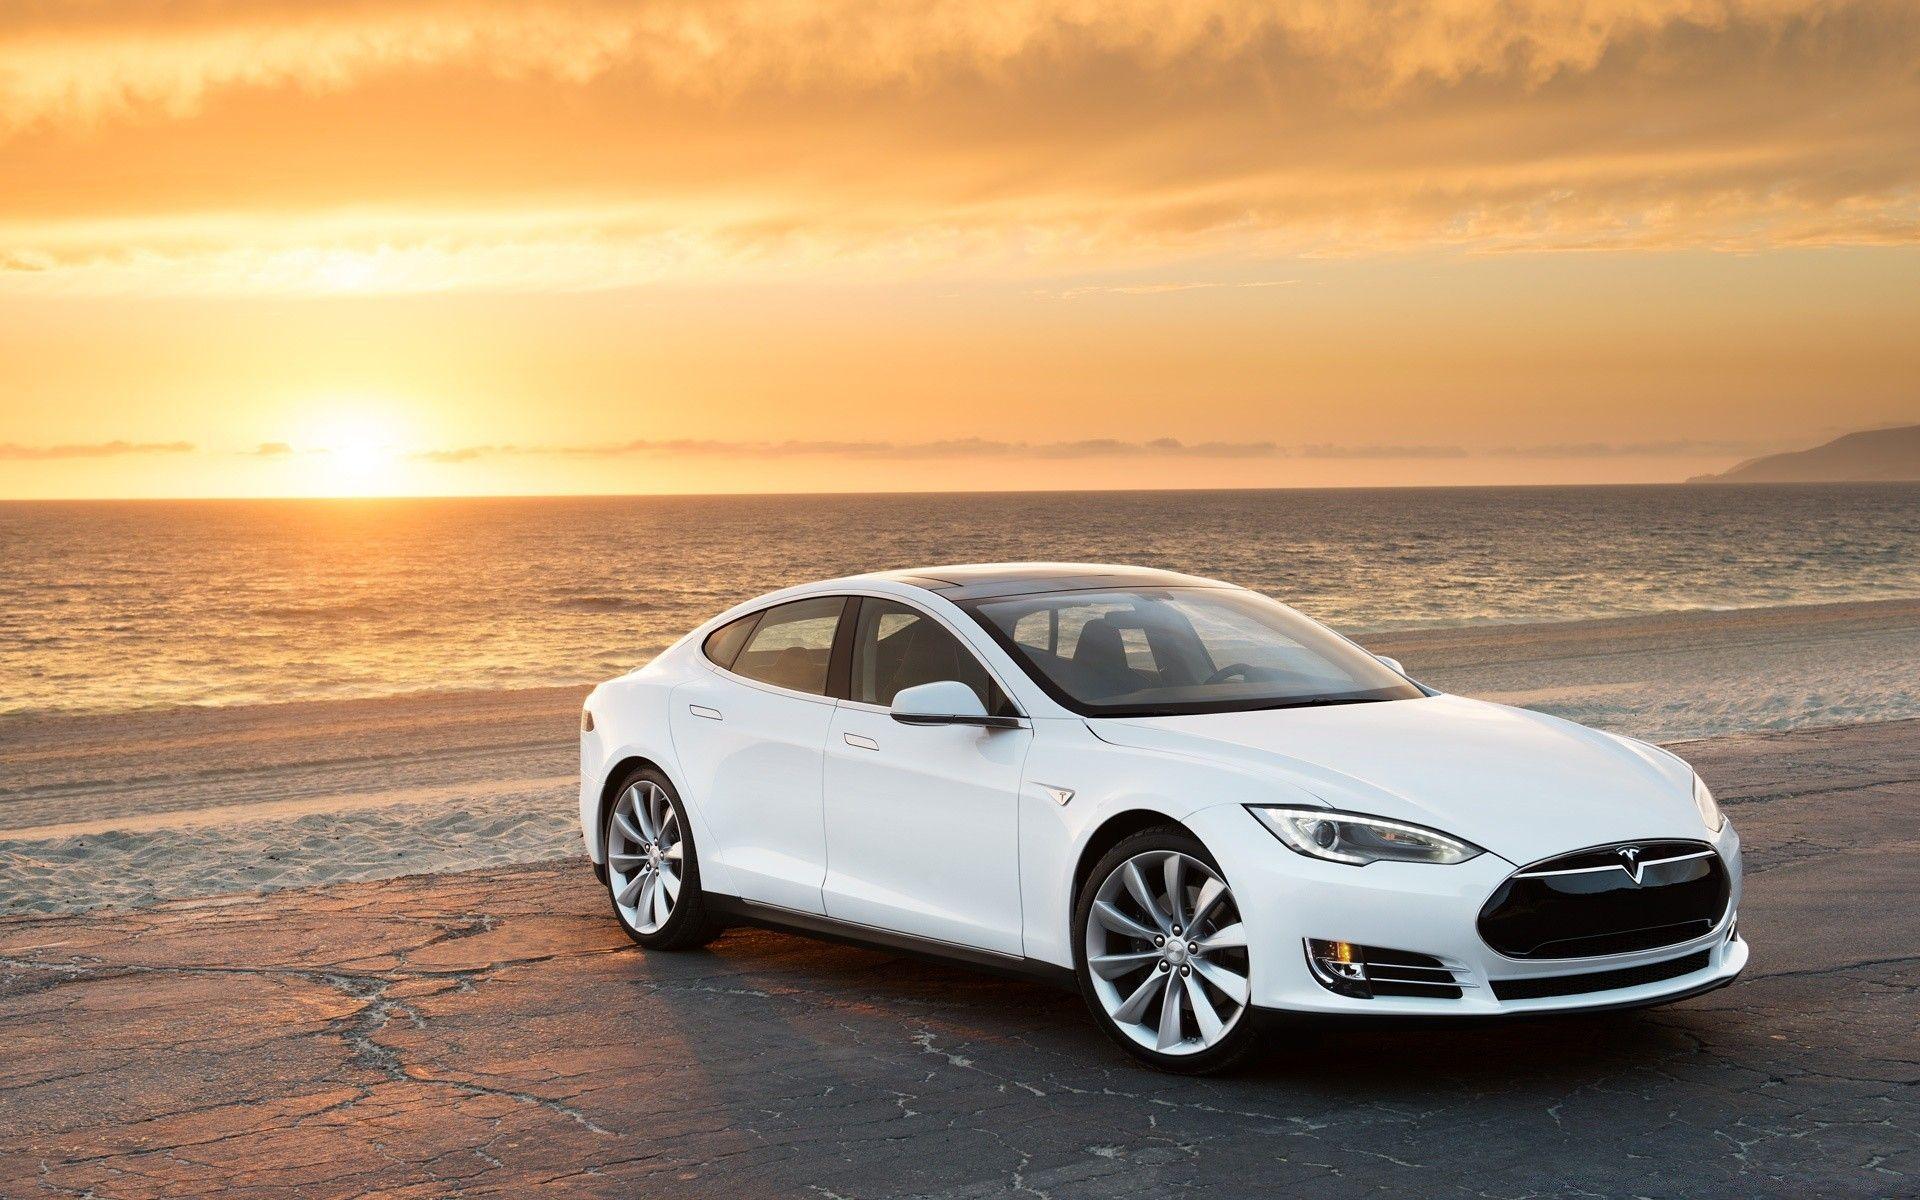 Tesla Model S in White, At the Beach. Android wallpaper for free